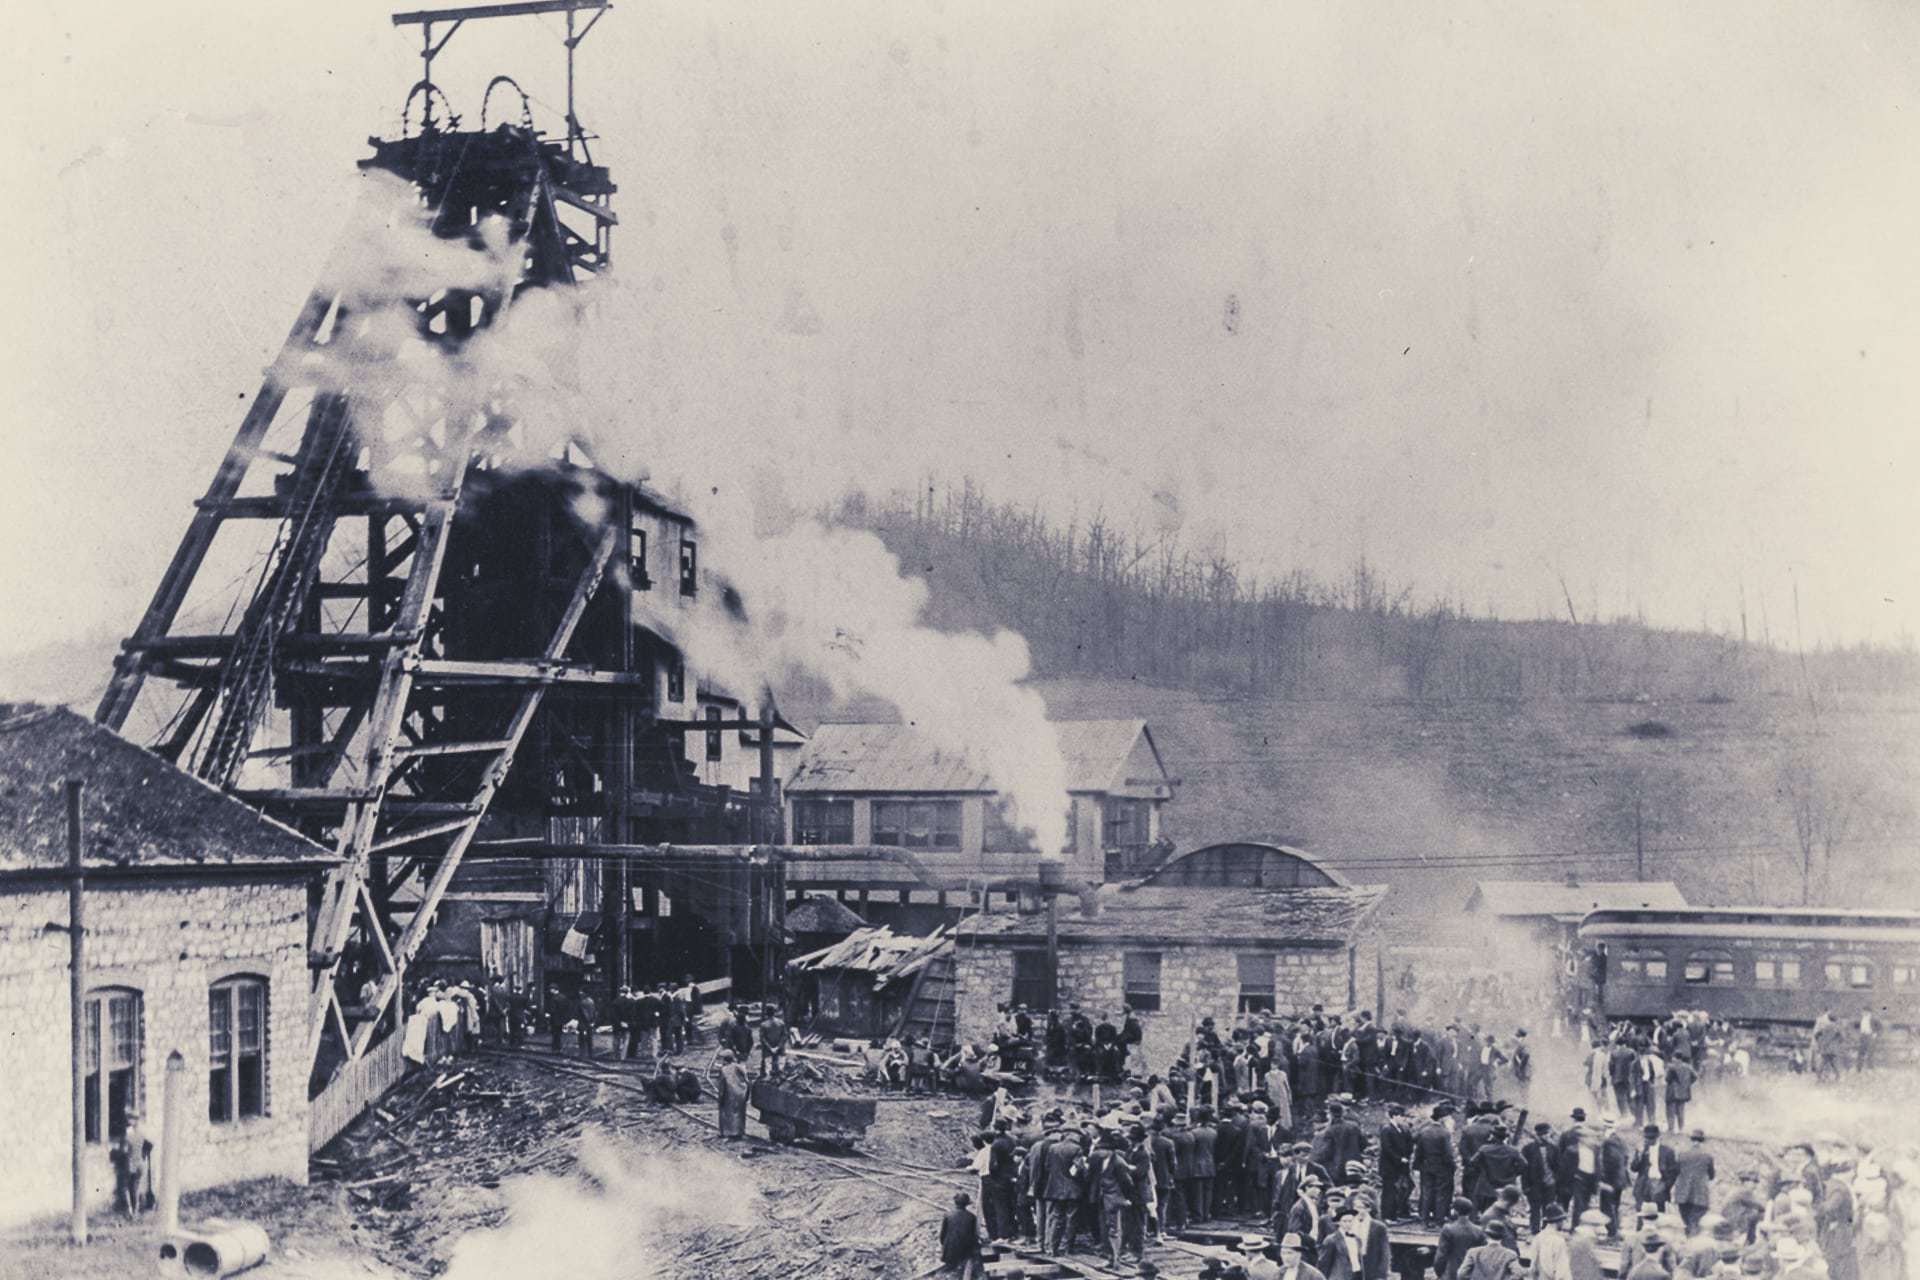 Eccles No. 5 mine disaster